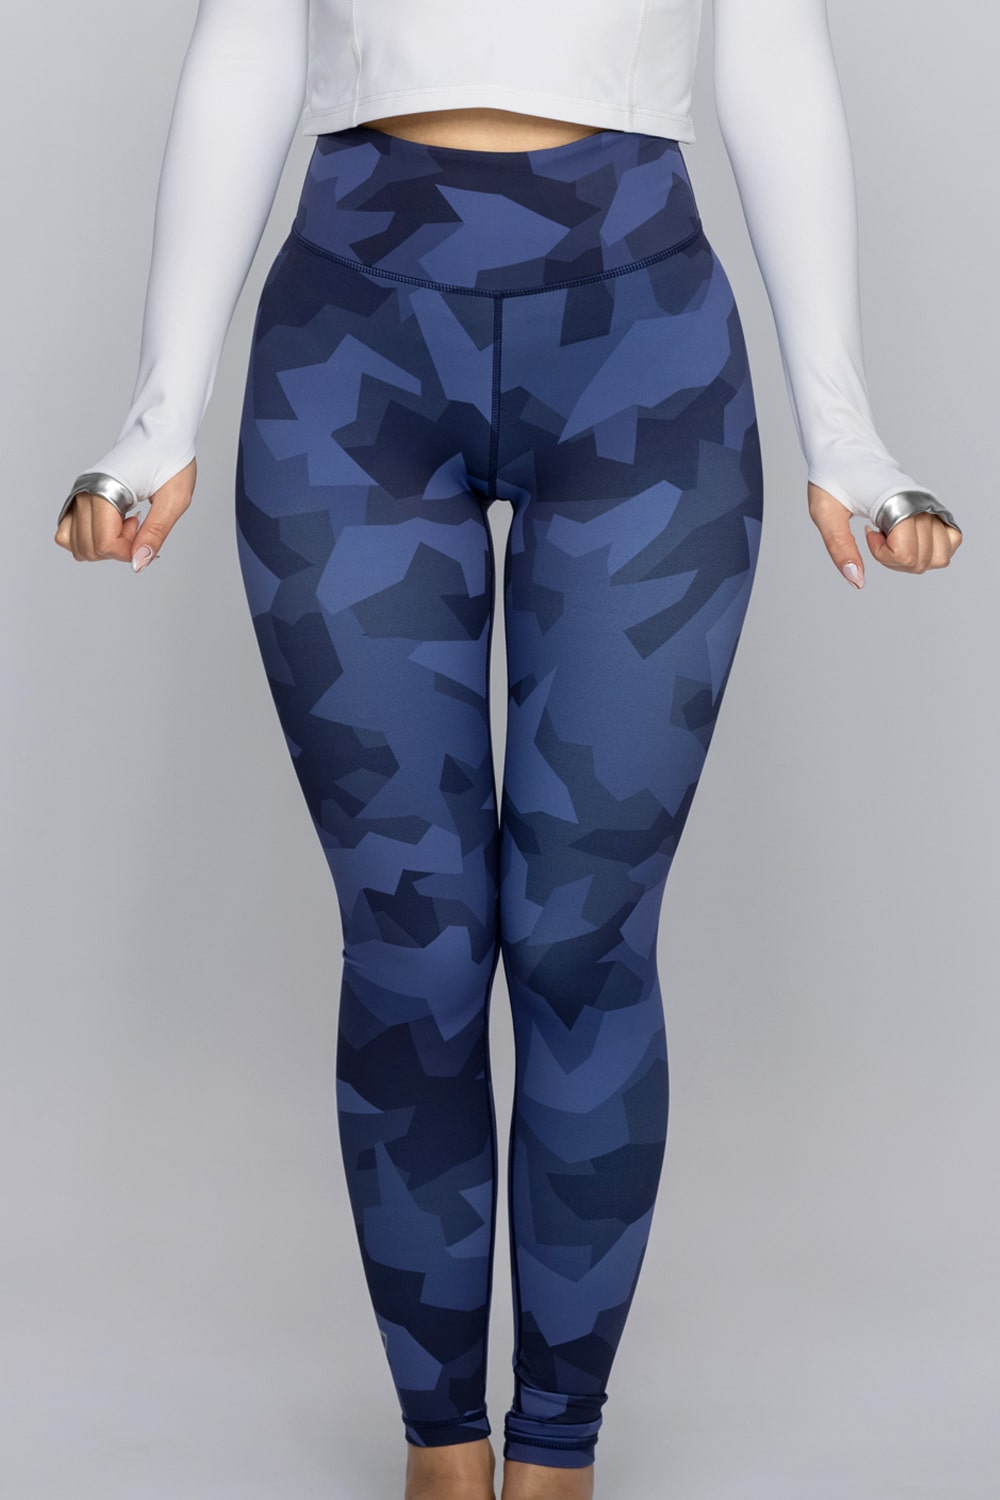 Camouflage Print Activewear Ankle-Length Tights in Blue ( Size S | Size M |  Size L | Size XL ) » BRITHIKA Luxury Fashion